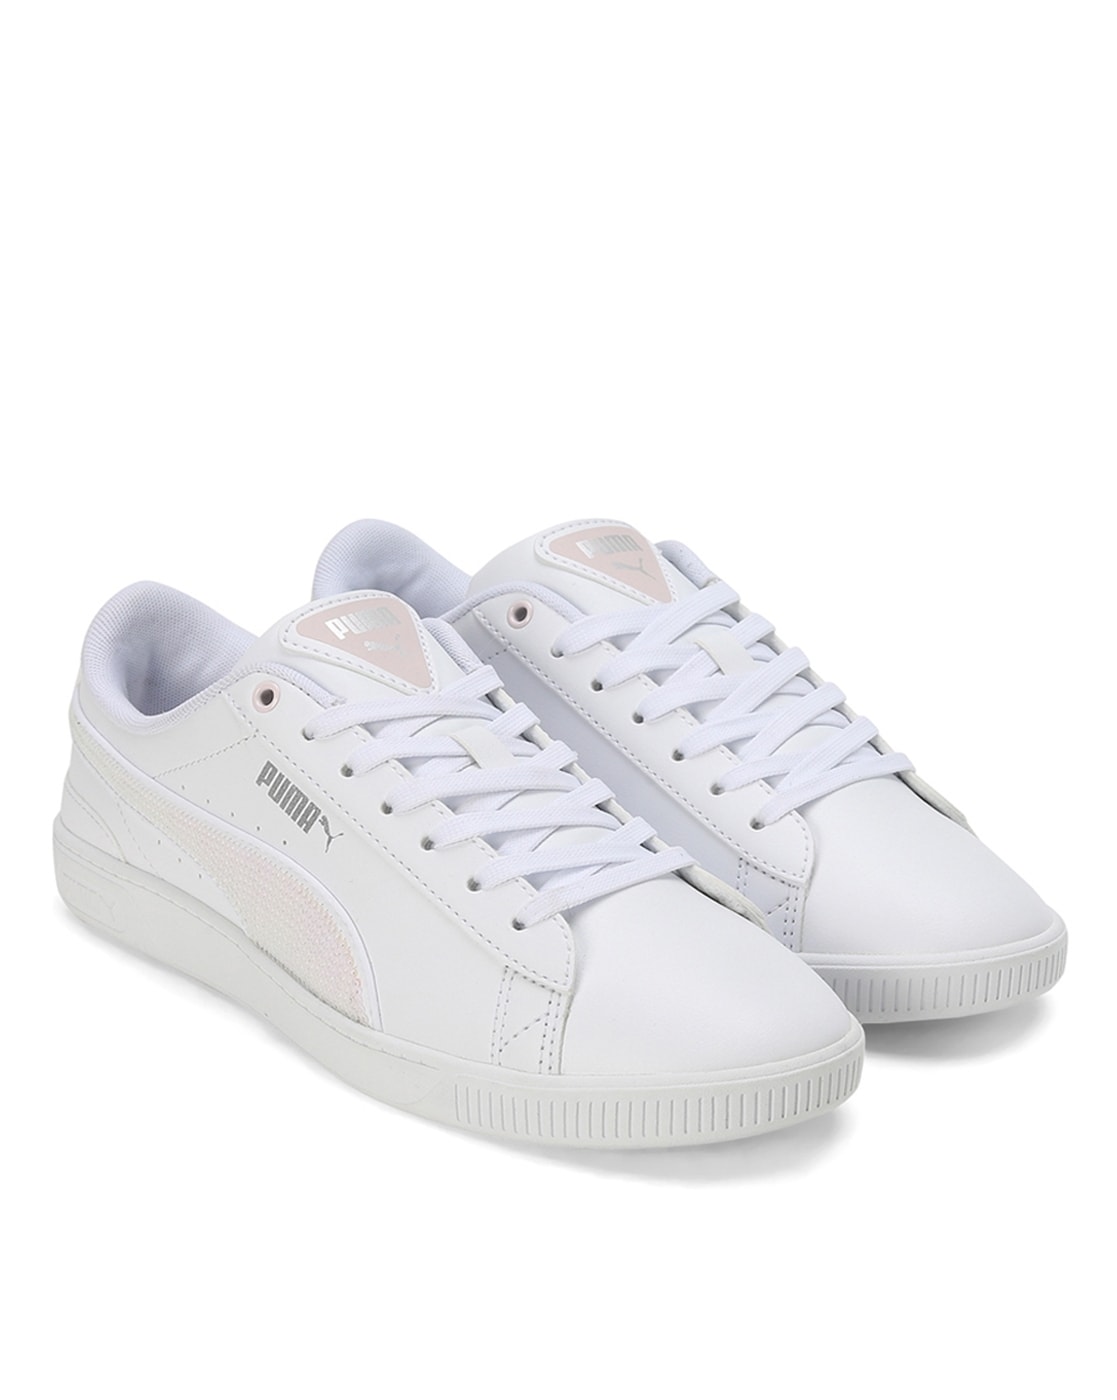 Mens White/Red/Blue 10.5 Puma BMW Leather sneakers | Leather sneakers,  Sneakers, White sneaker